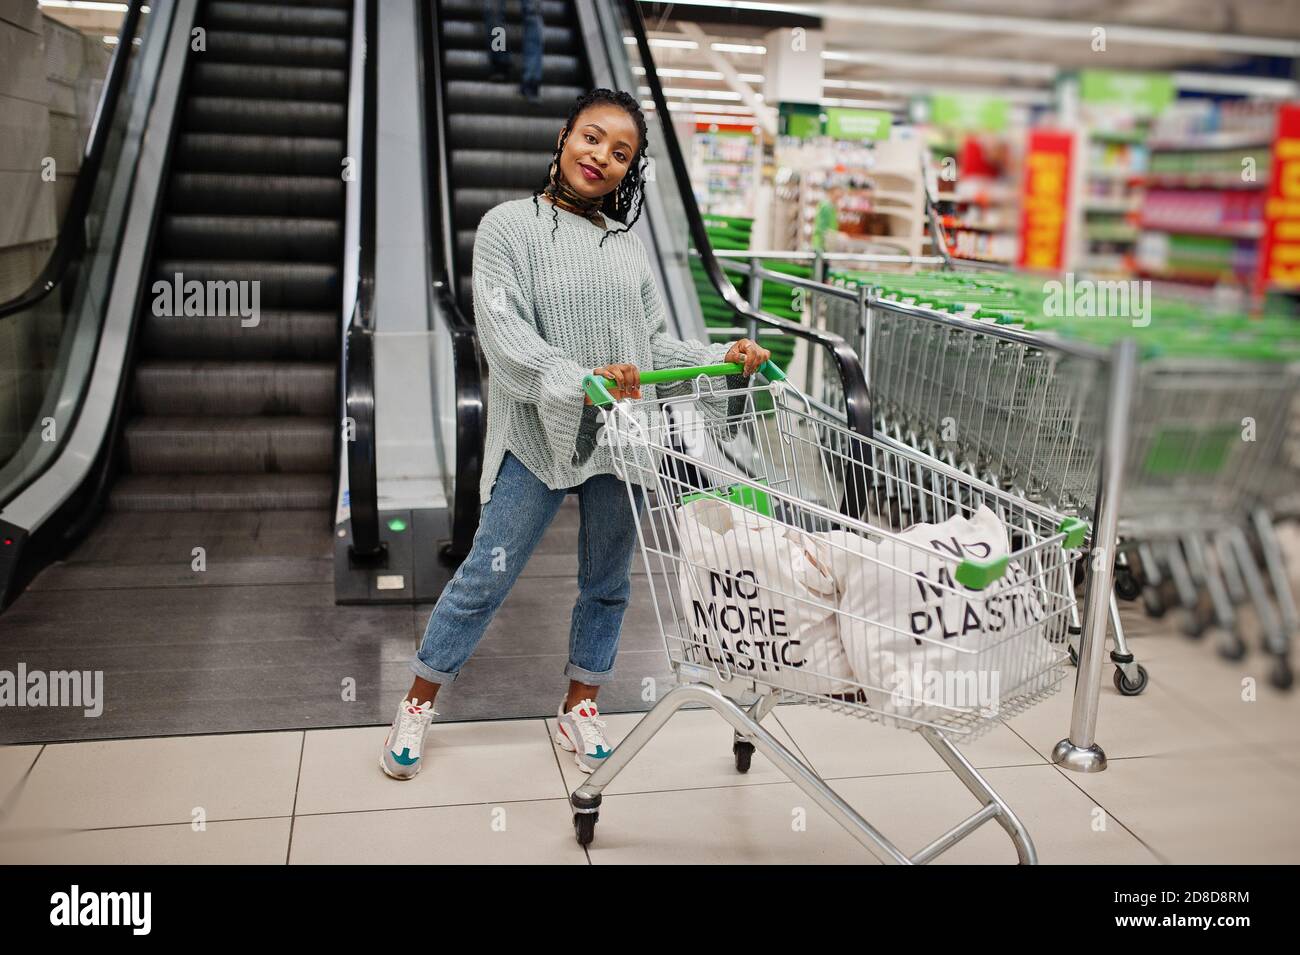 No more plastic. African woman with shopping cart trolley posed at ...